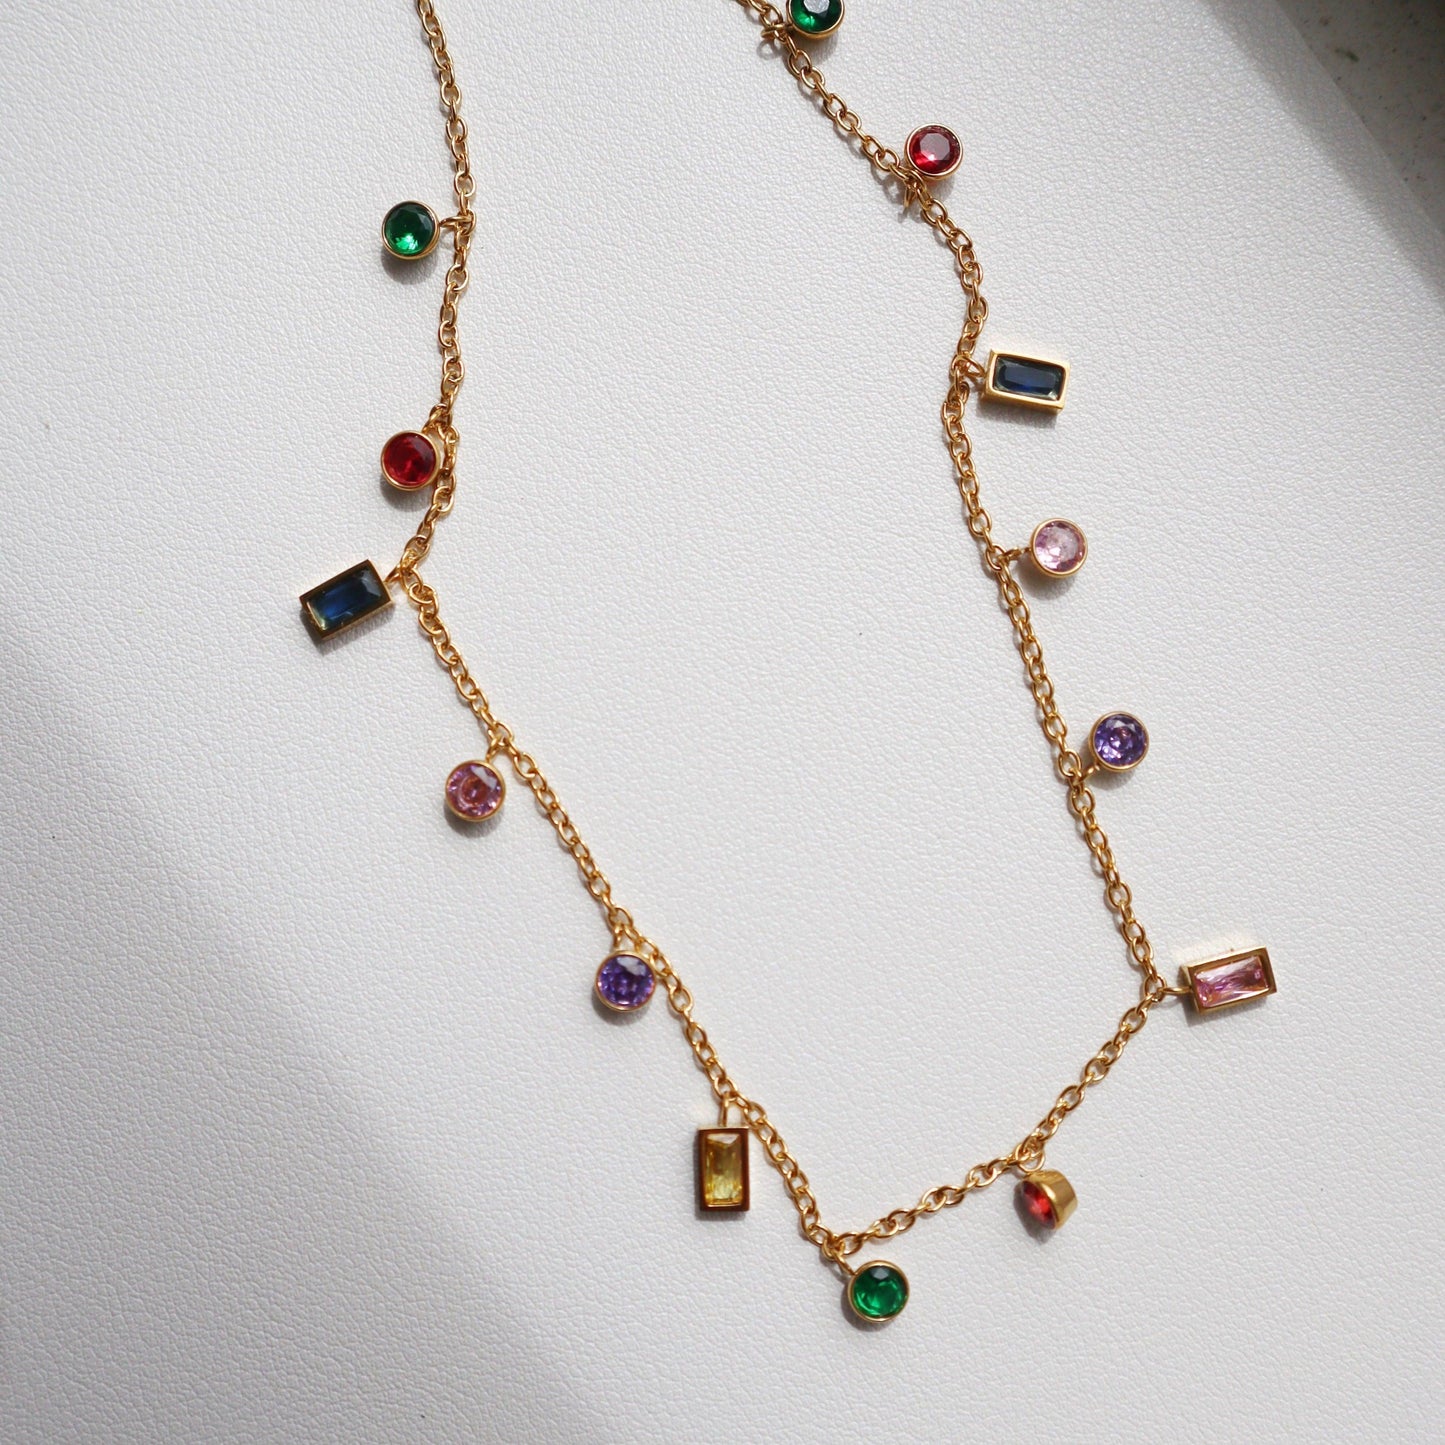 Kahlea Necklace | Multicolor Gem Necklace - JESSA JEWELRY | GOLD JEWELRY; dainty, affordable gold everyday jewelry. Tarnish free, water-resistant, hypoallergenic. Jewelry for everyday wear